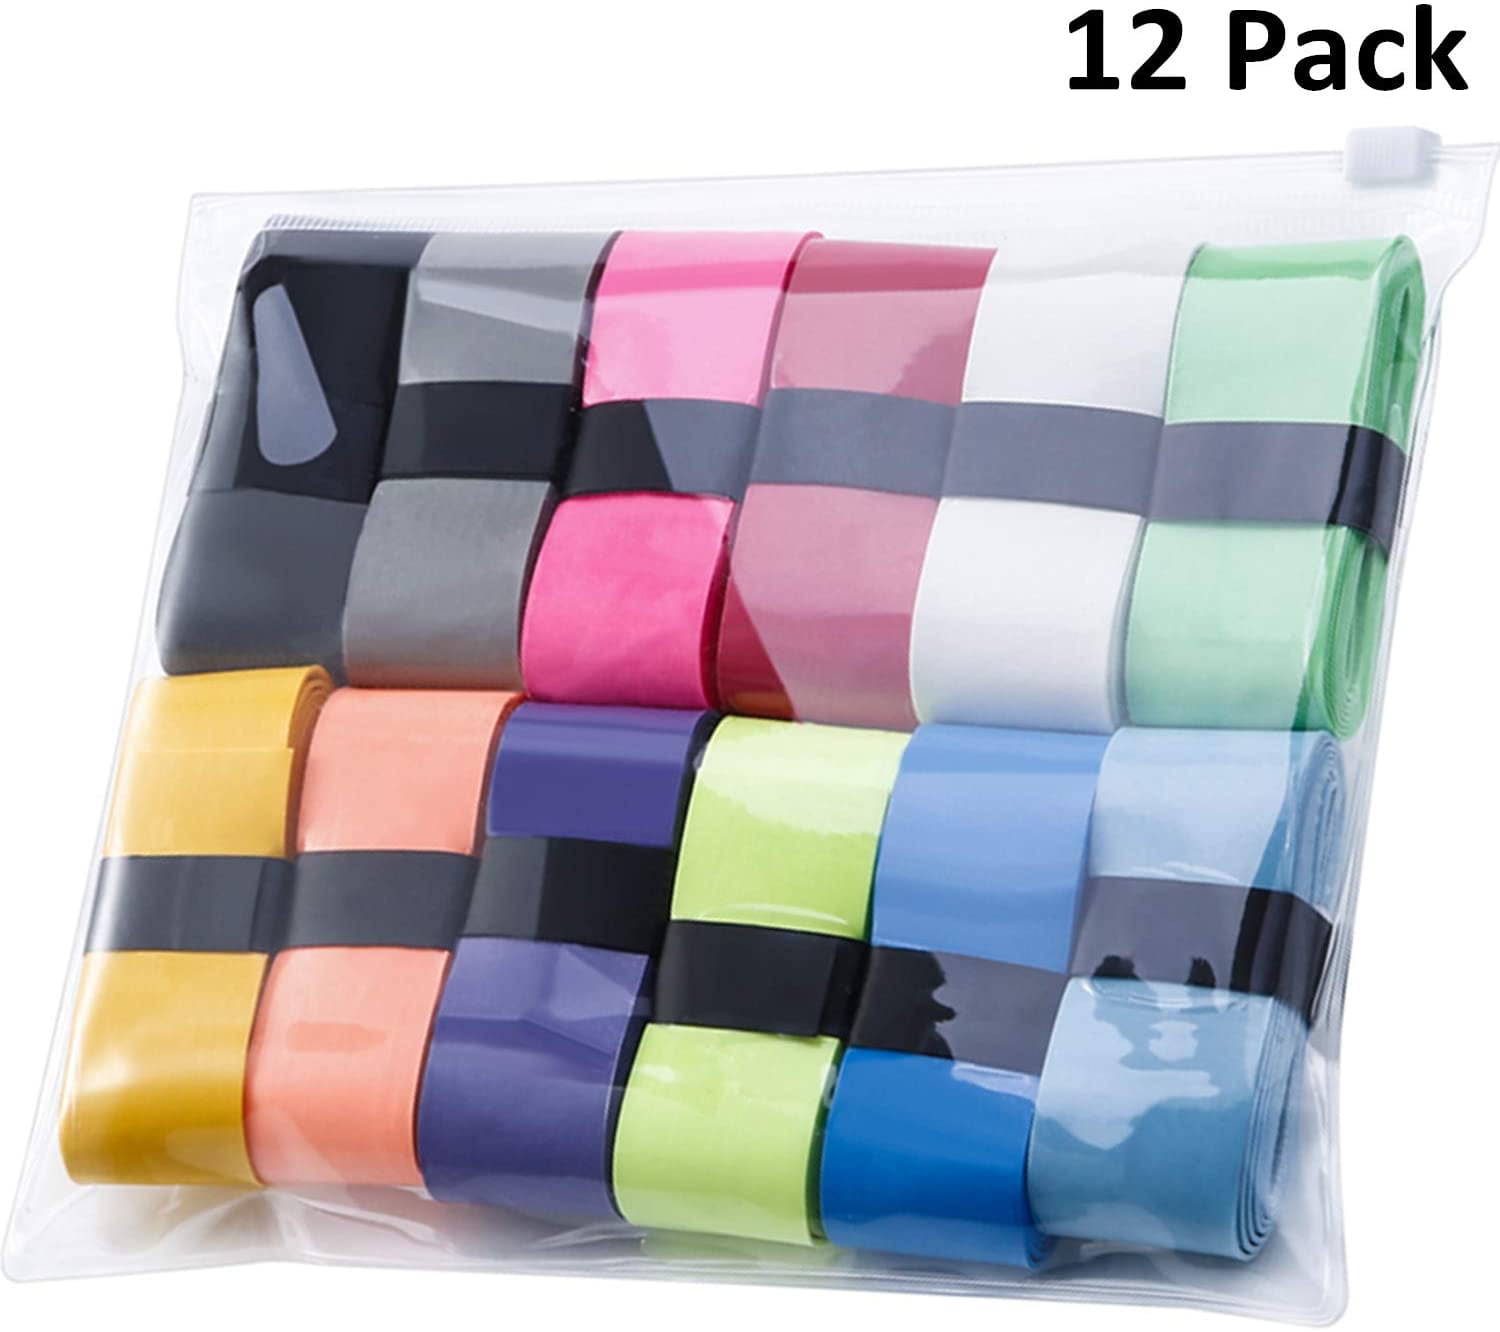 12 Pieces Tennis Badminton Racket Overgrips for Anti-slip and Absorbent Grip 